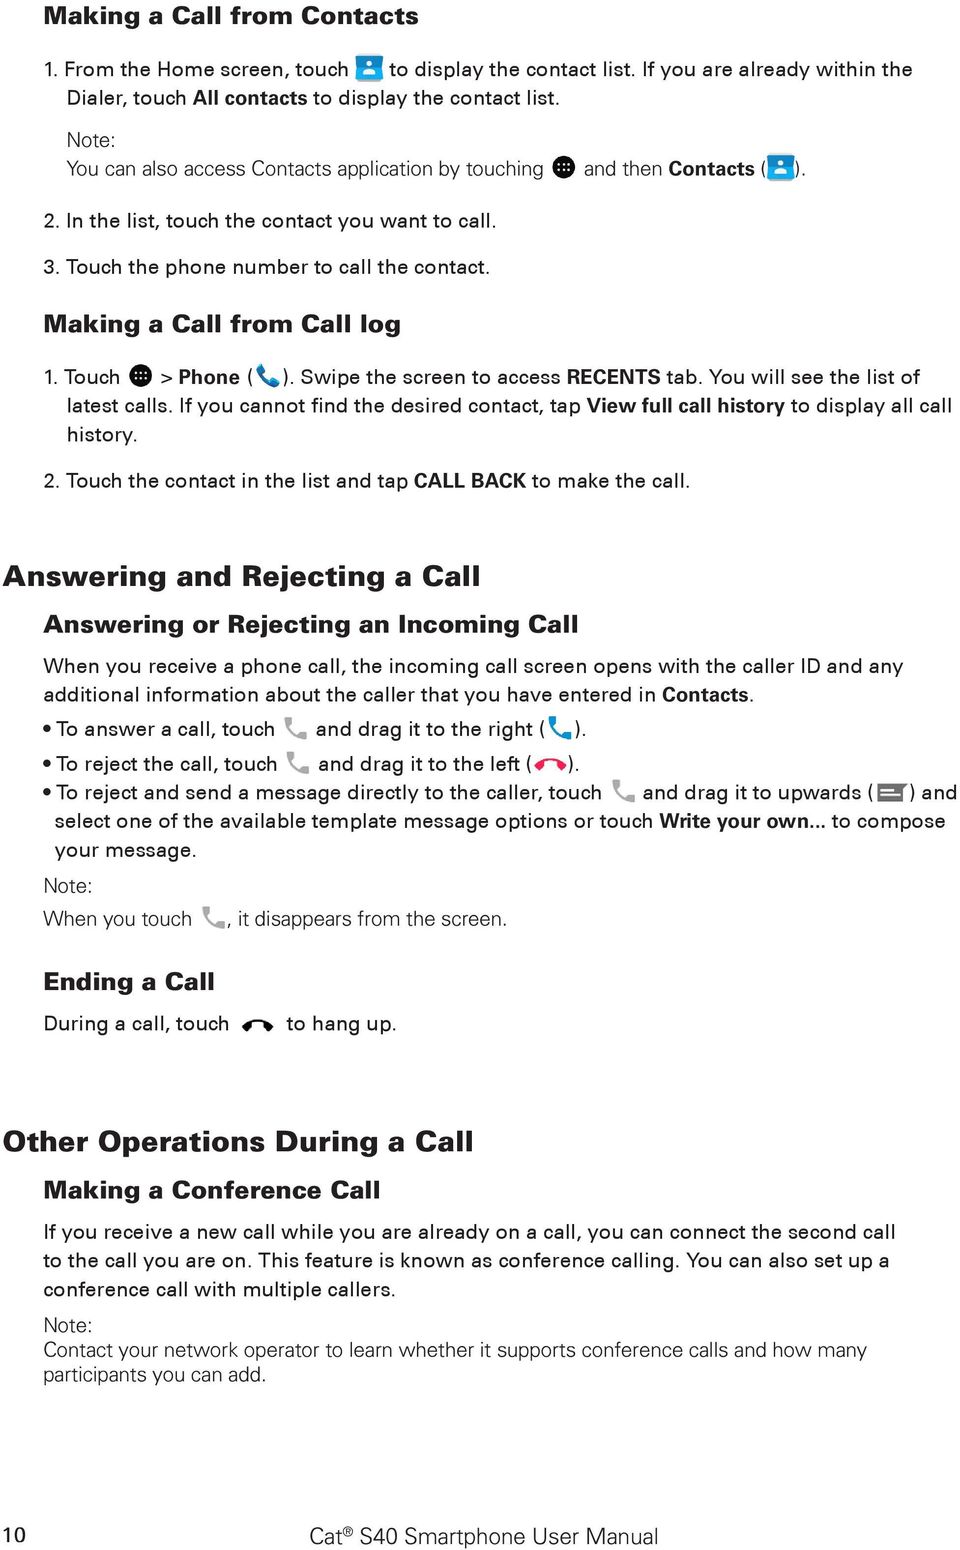 Making a Call from Call log 1. Touch > Phone ( ). Swipe the screen to access RECENTS tab. You will see the list of latest calls.